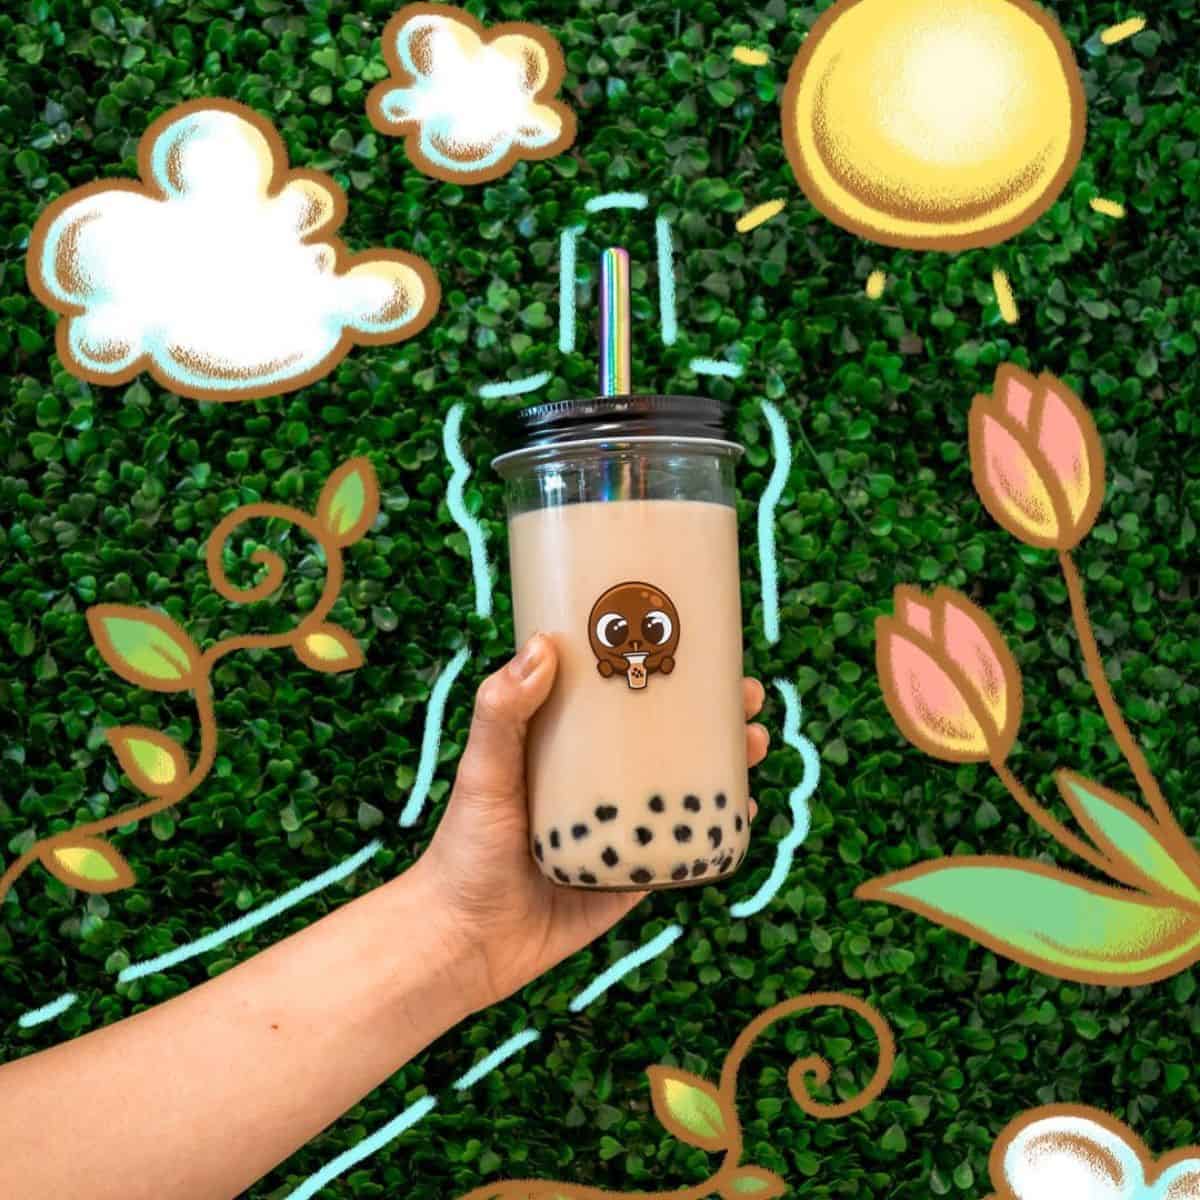 The Best Reusable Boba Cup – Teaboco